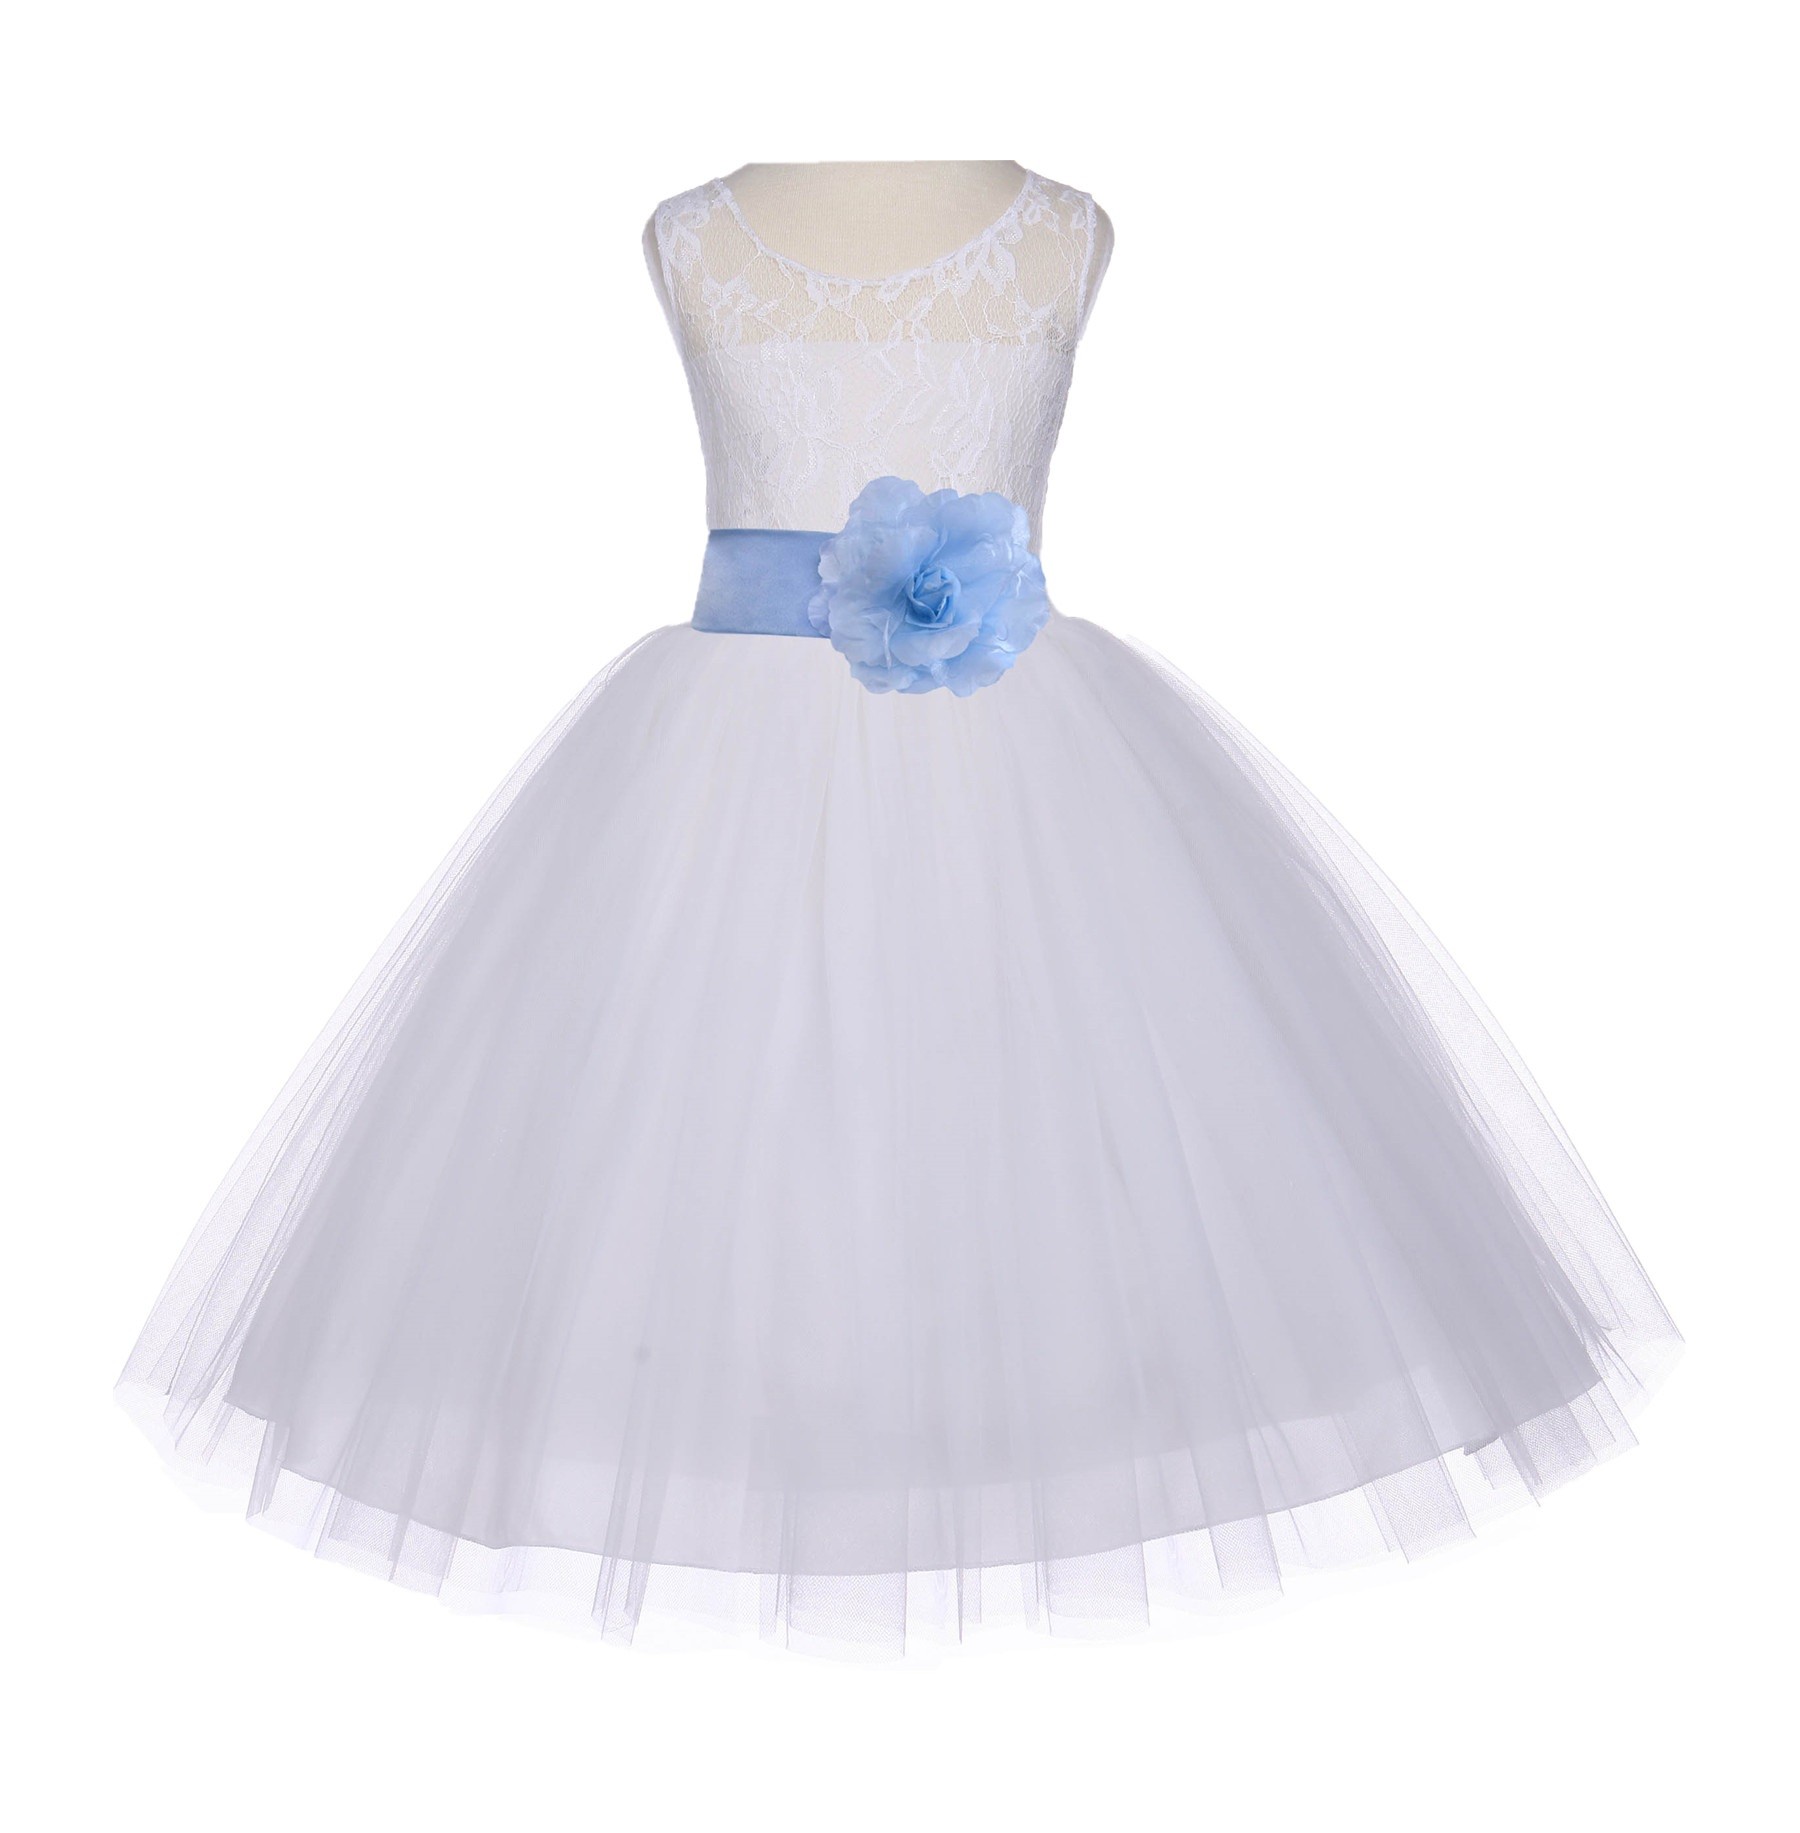 Ivory/Sky Floral Lace Bodice Tulle Flower Girl Dress Bridesmaid 153S